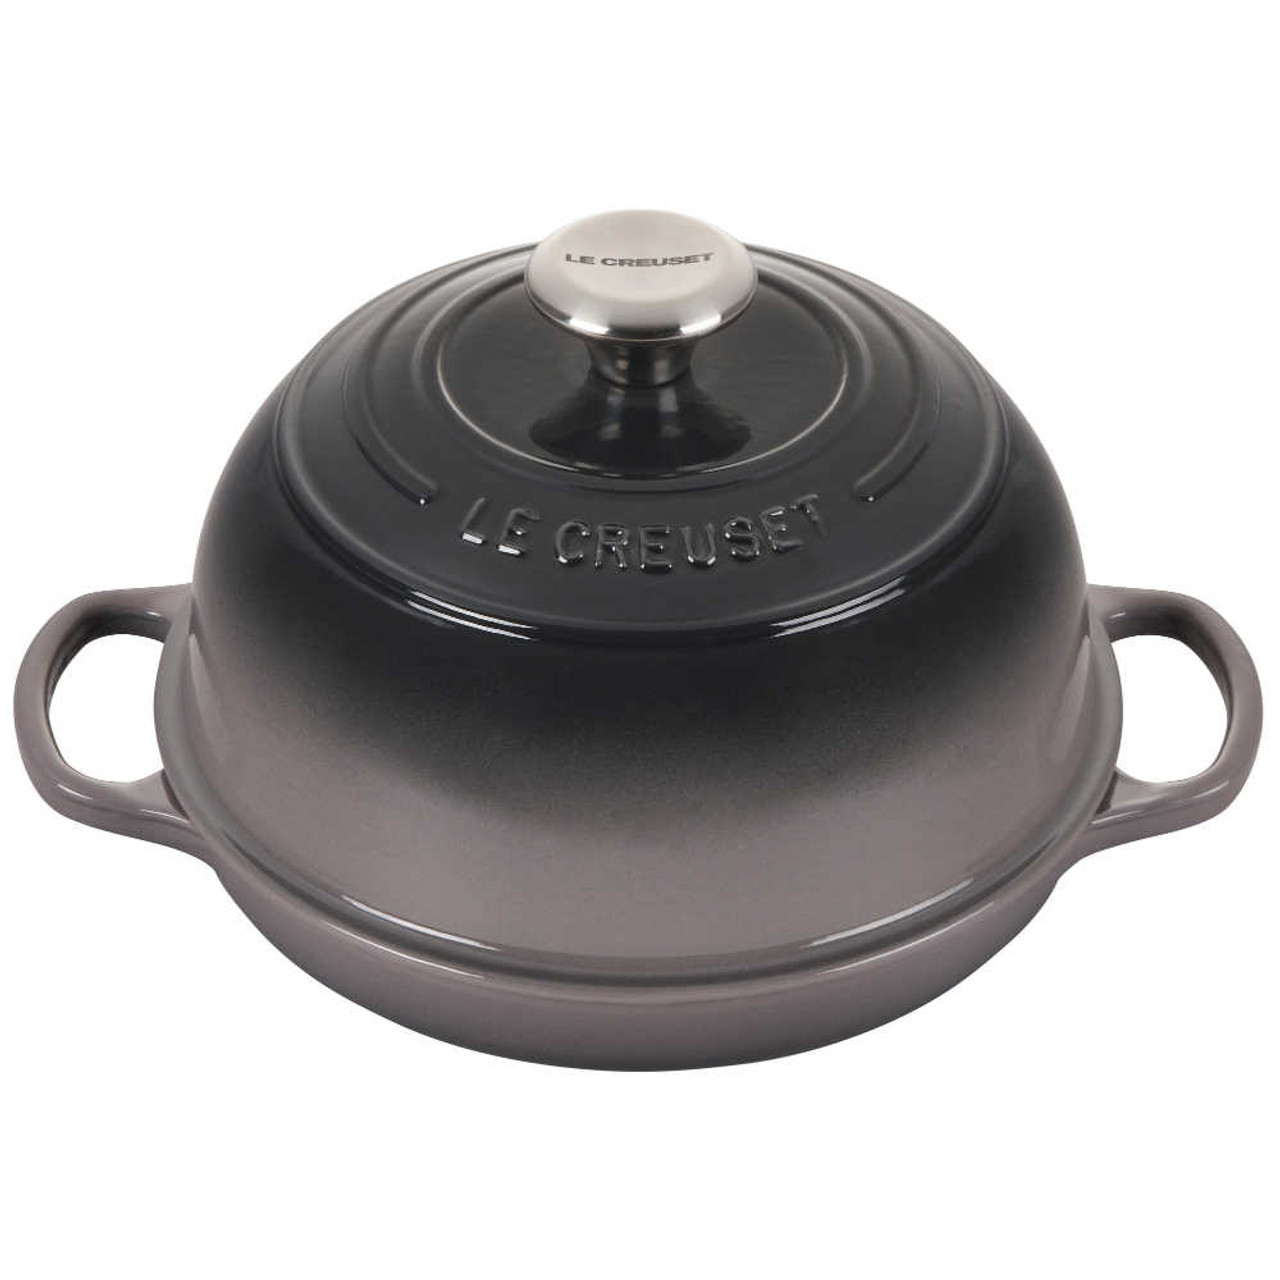 https://cdn11.bigcommerce.com/s-hccytny0od/images/stencil/1280x1280/products/5133/22074/Le_Creuset_Cast_Iron_Bread_Oven_in_Oyster__03614.1666741669.jpg?c=2?imbypass=on